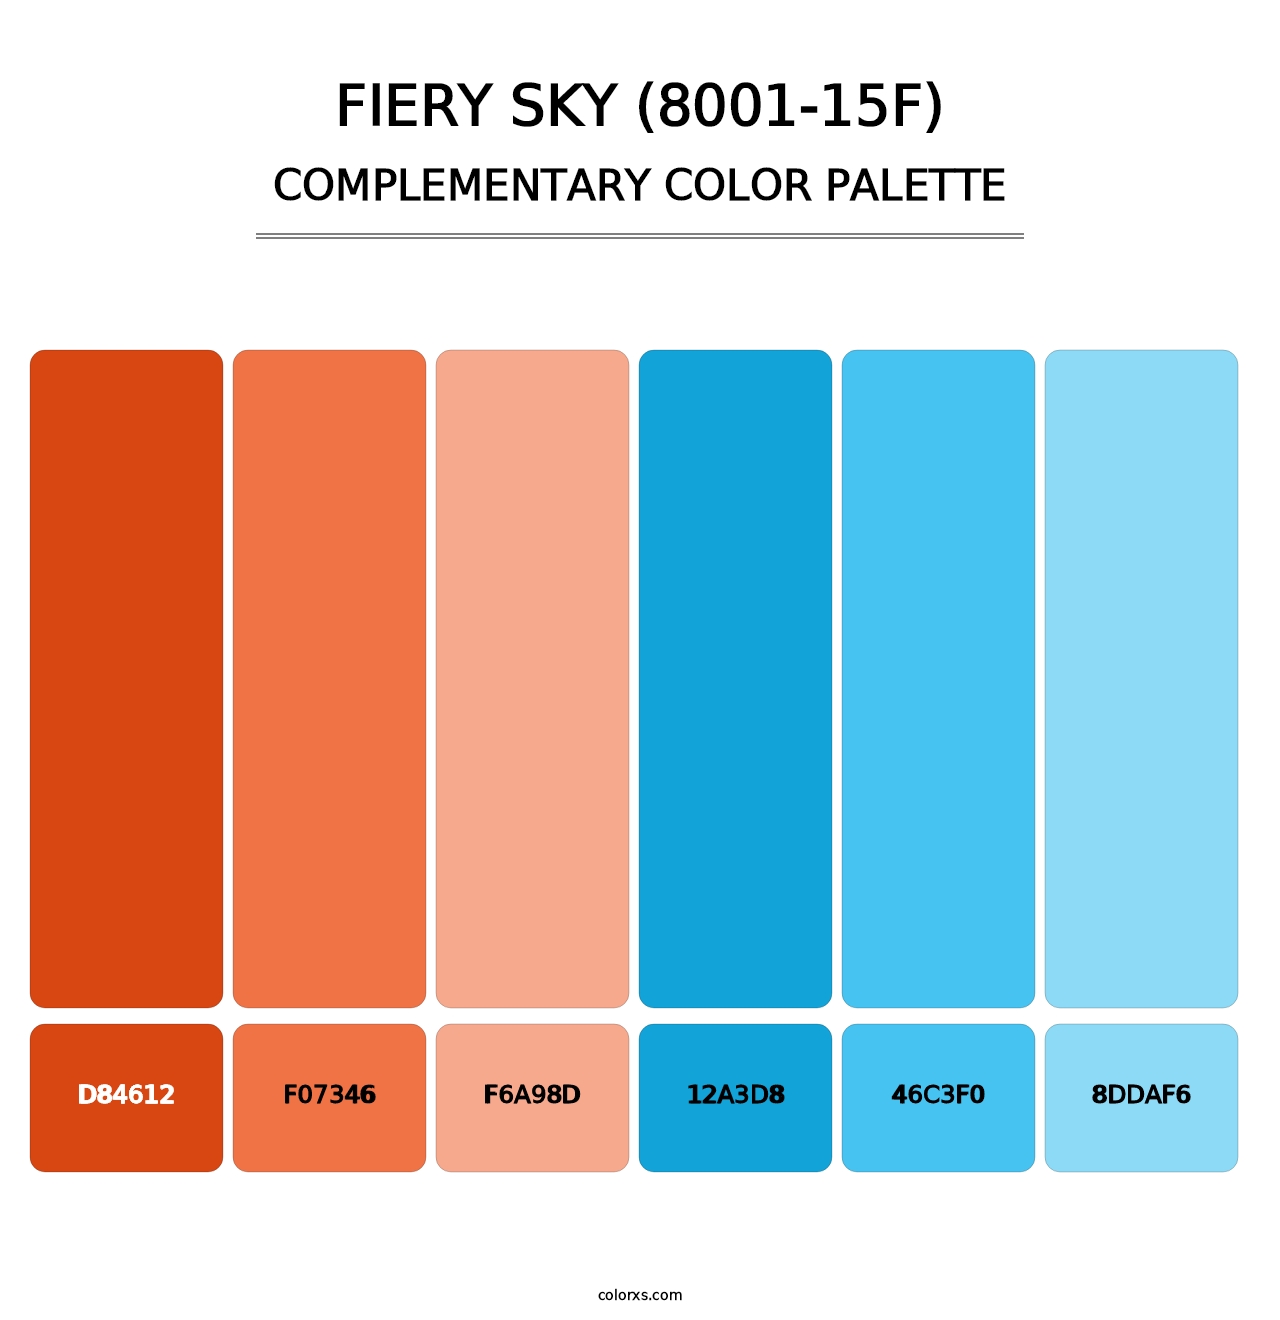 Fiery Sky (8001-15F) - Complementary Color Palette